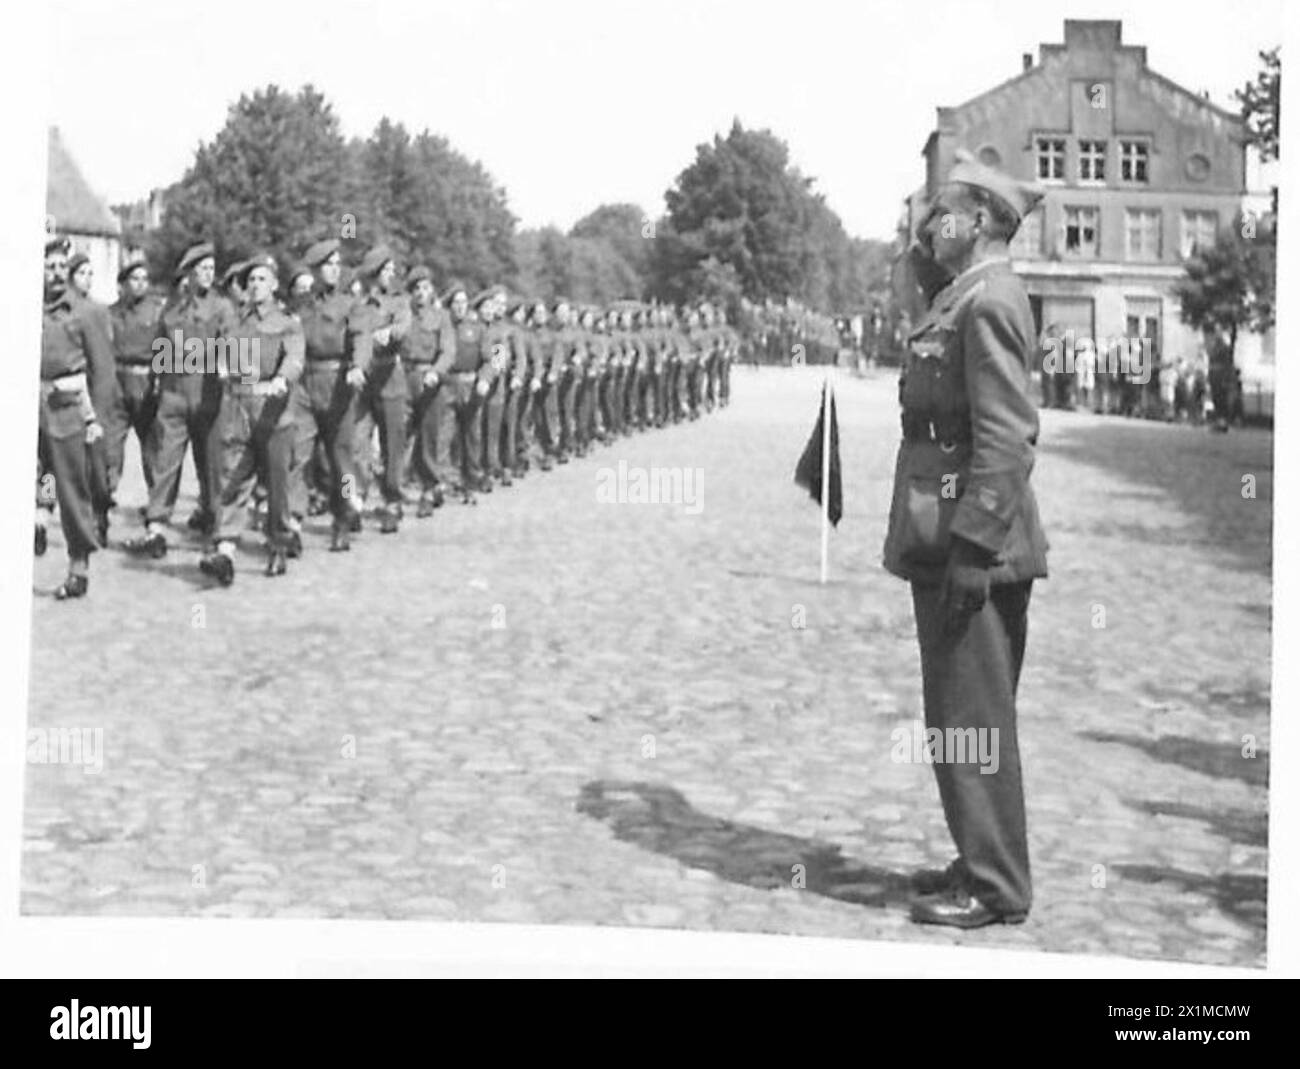 COMMEMORATION SERVICE : 2ND BATTALION DEVONSHIRE REGIMENT - At the saluting base, where the salute was taken by Colonel Pierrat, a French officer, who was Commandant of the French Camp in Schleswig-Holstein. He was the commander of the 42 Infantry Division at Metz, British Army, 21st Army Group Stock Photo